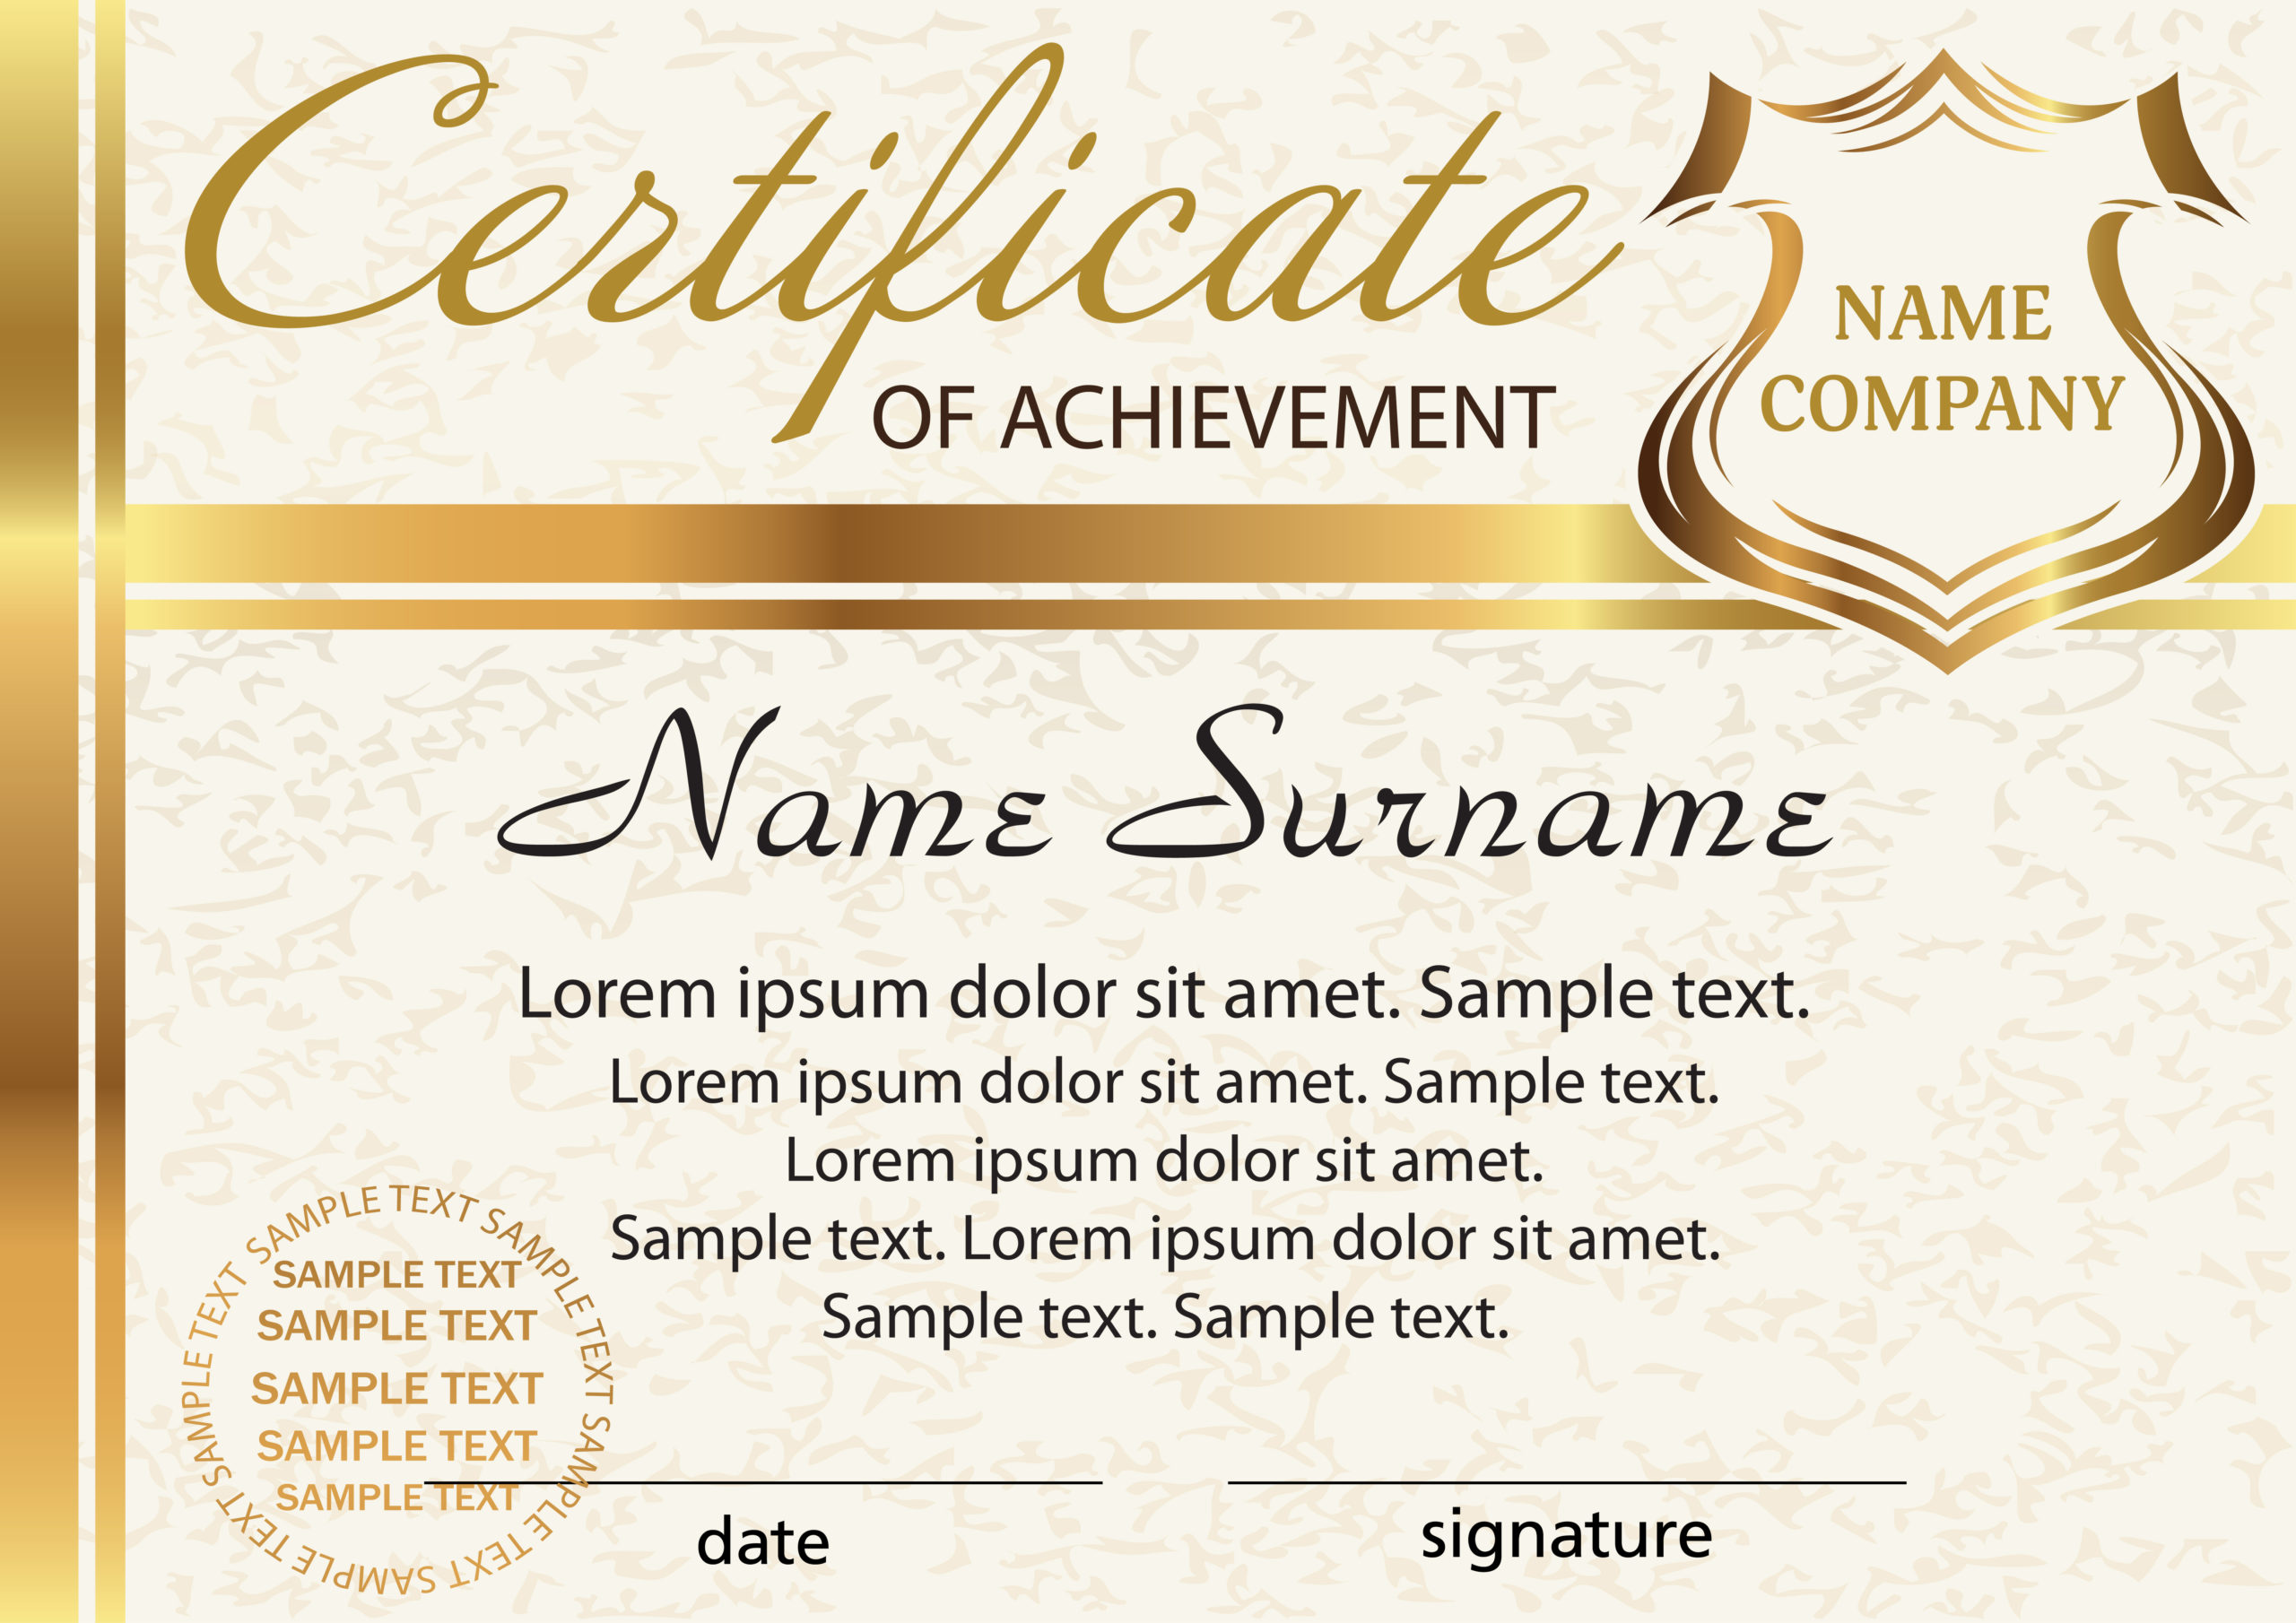 Template Certificate Of Achievement Elegant Gold Design With Regard To Certificate Of Attainment Template